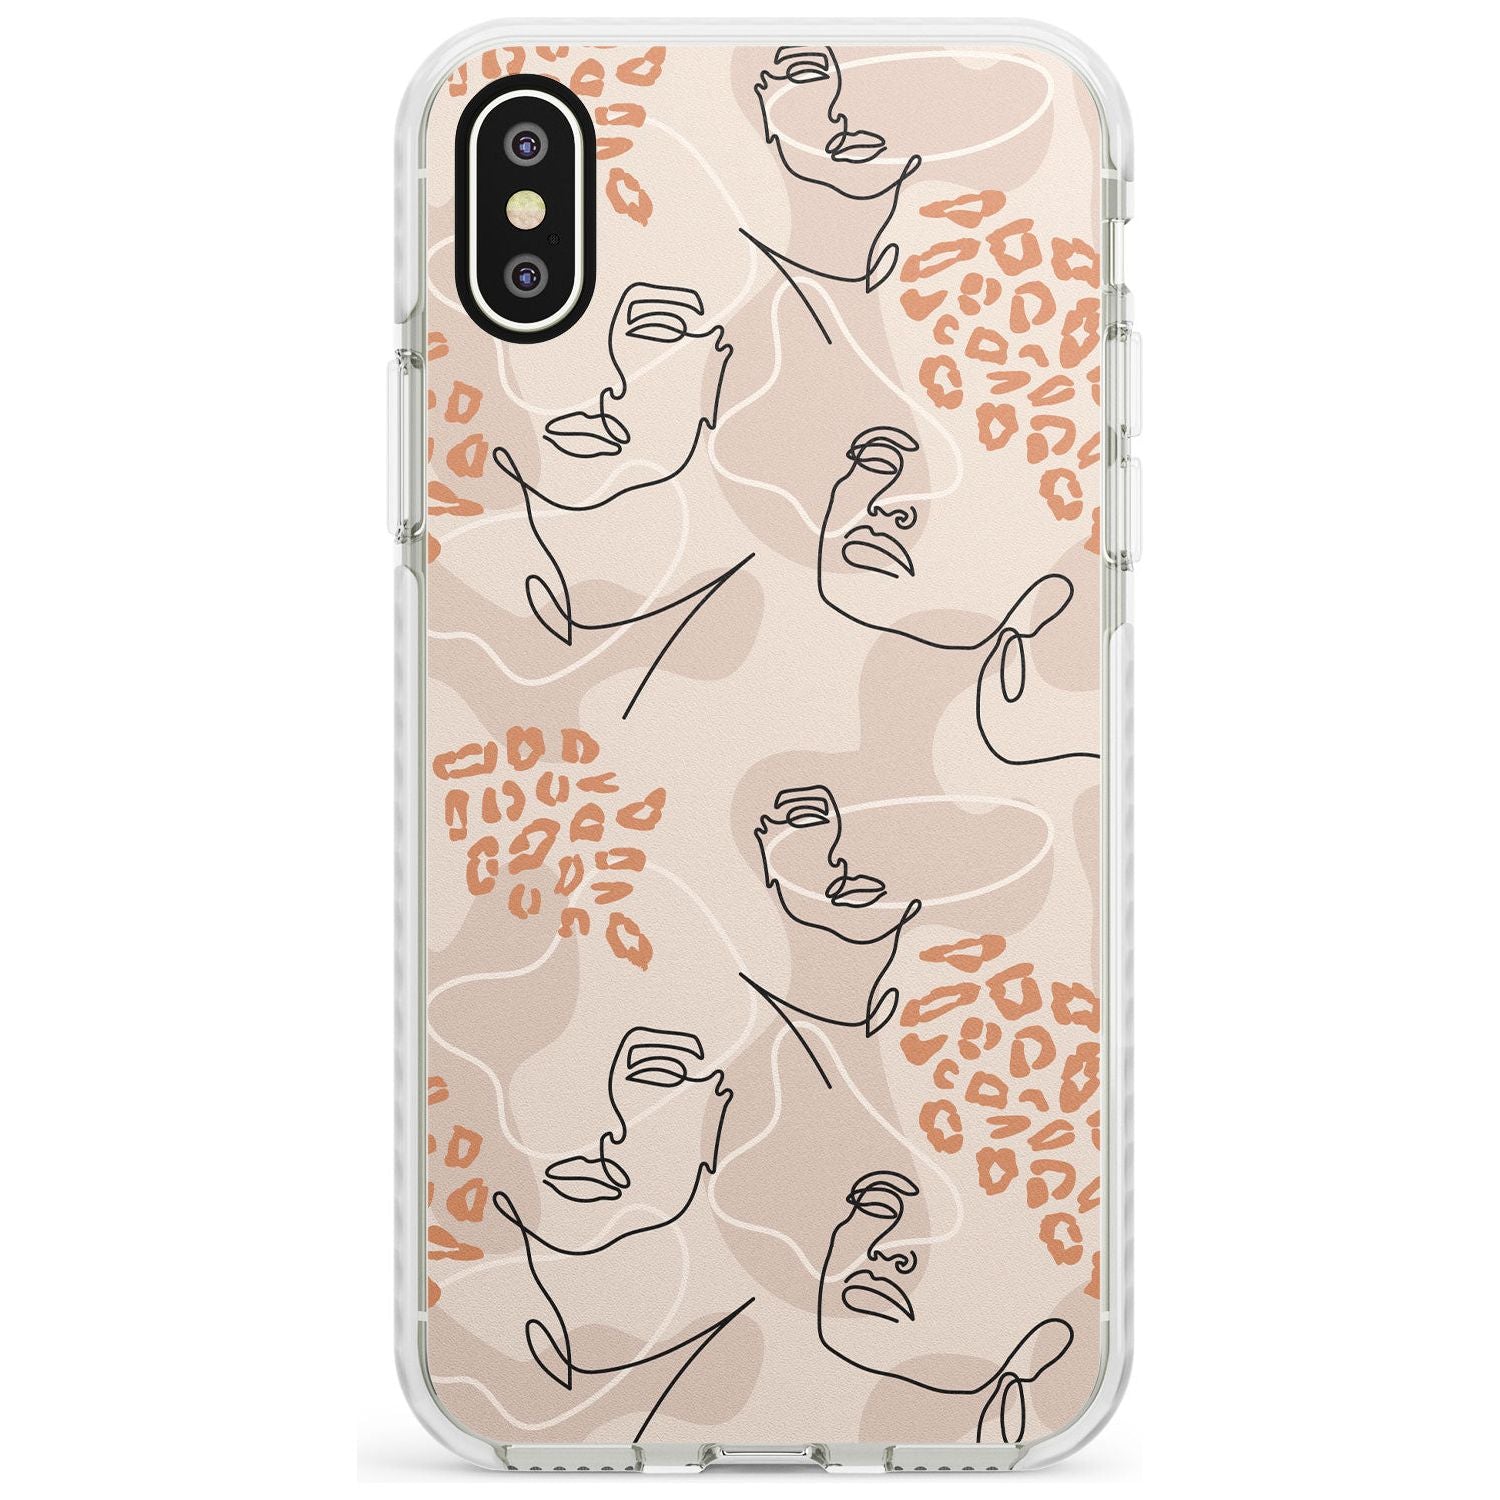 Leopard Print Stylish Abstract Faces Impact Phone Case for iPhone X XS Max XR